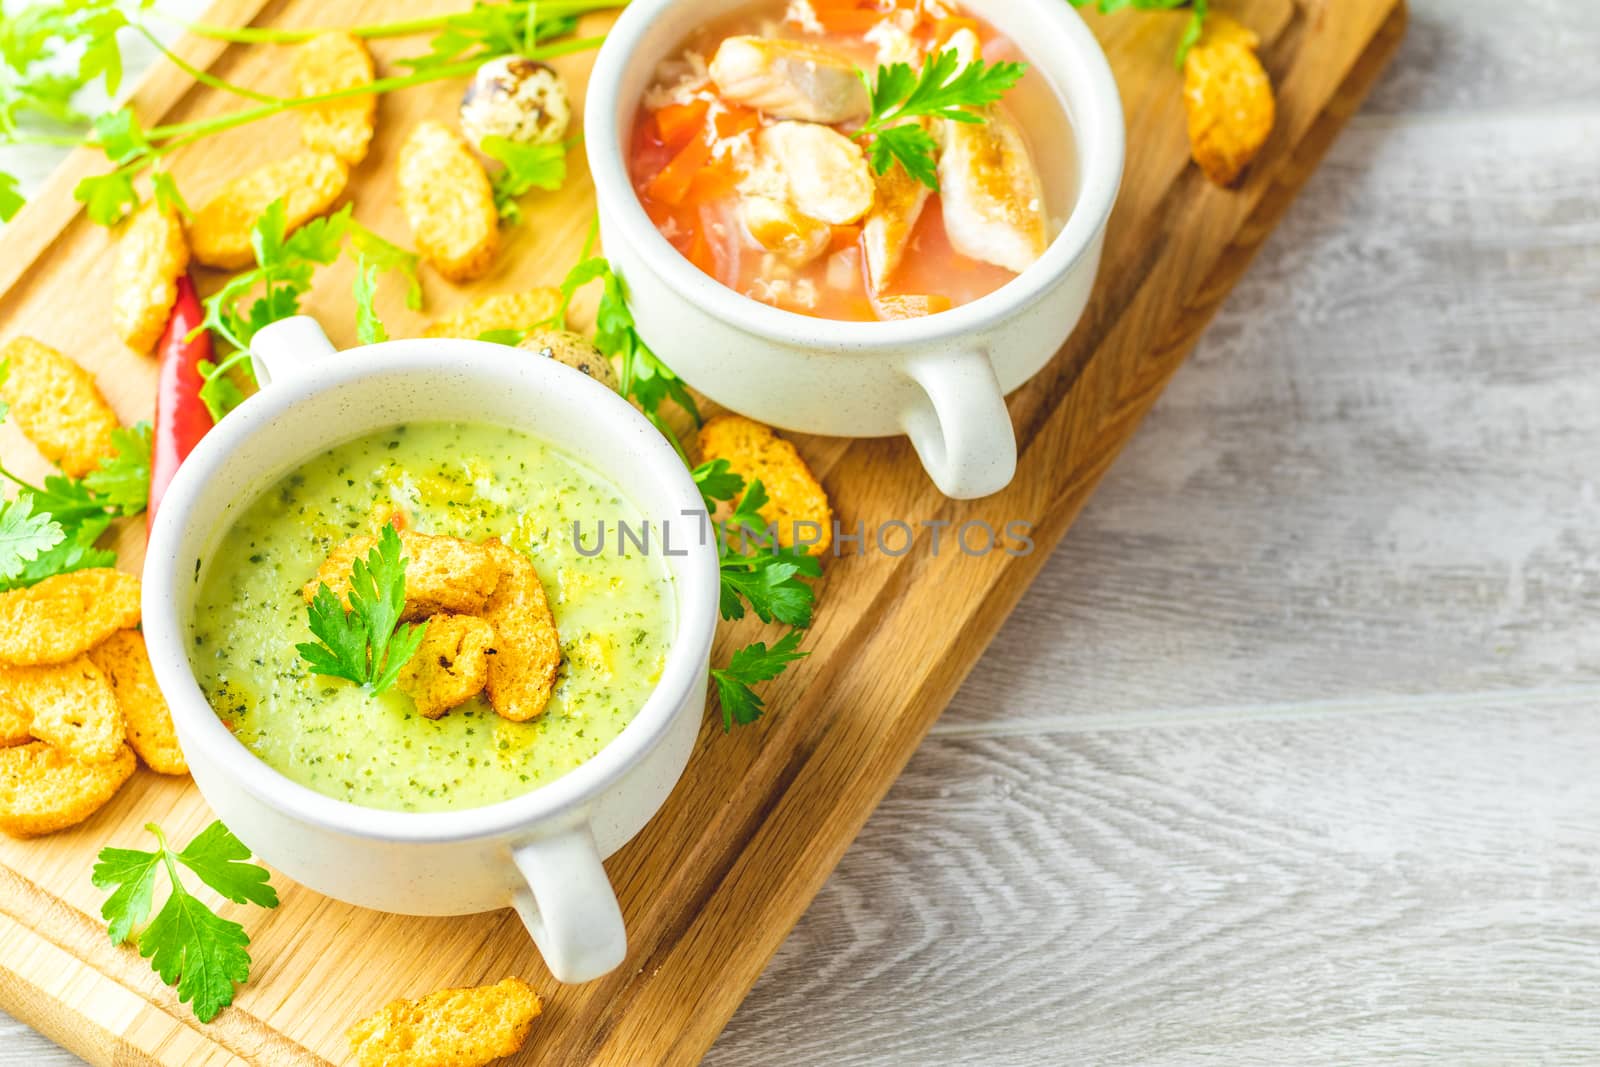 Concept of healthy vegetable and legume soups by ArtSvitlyna